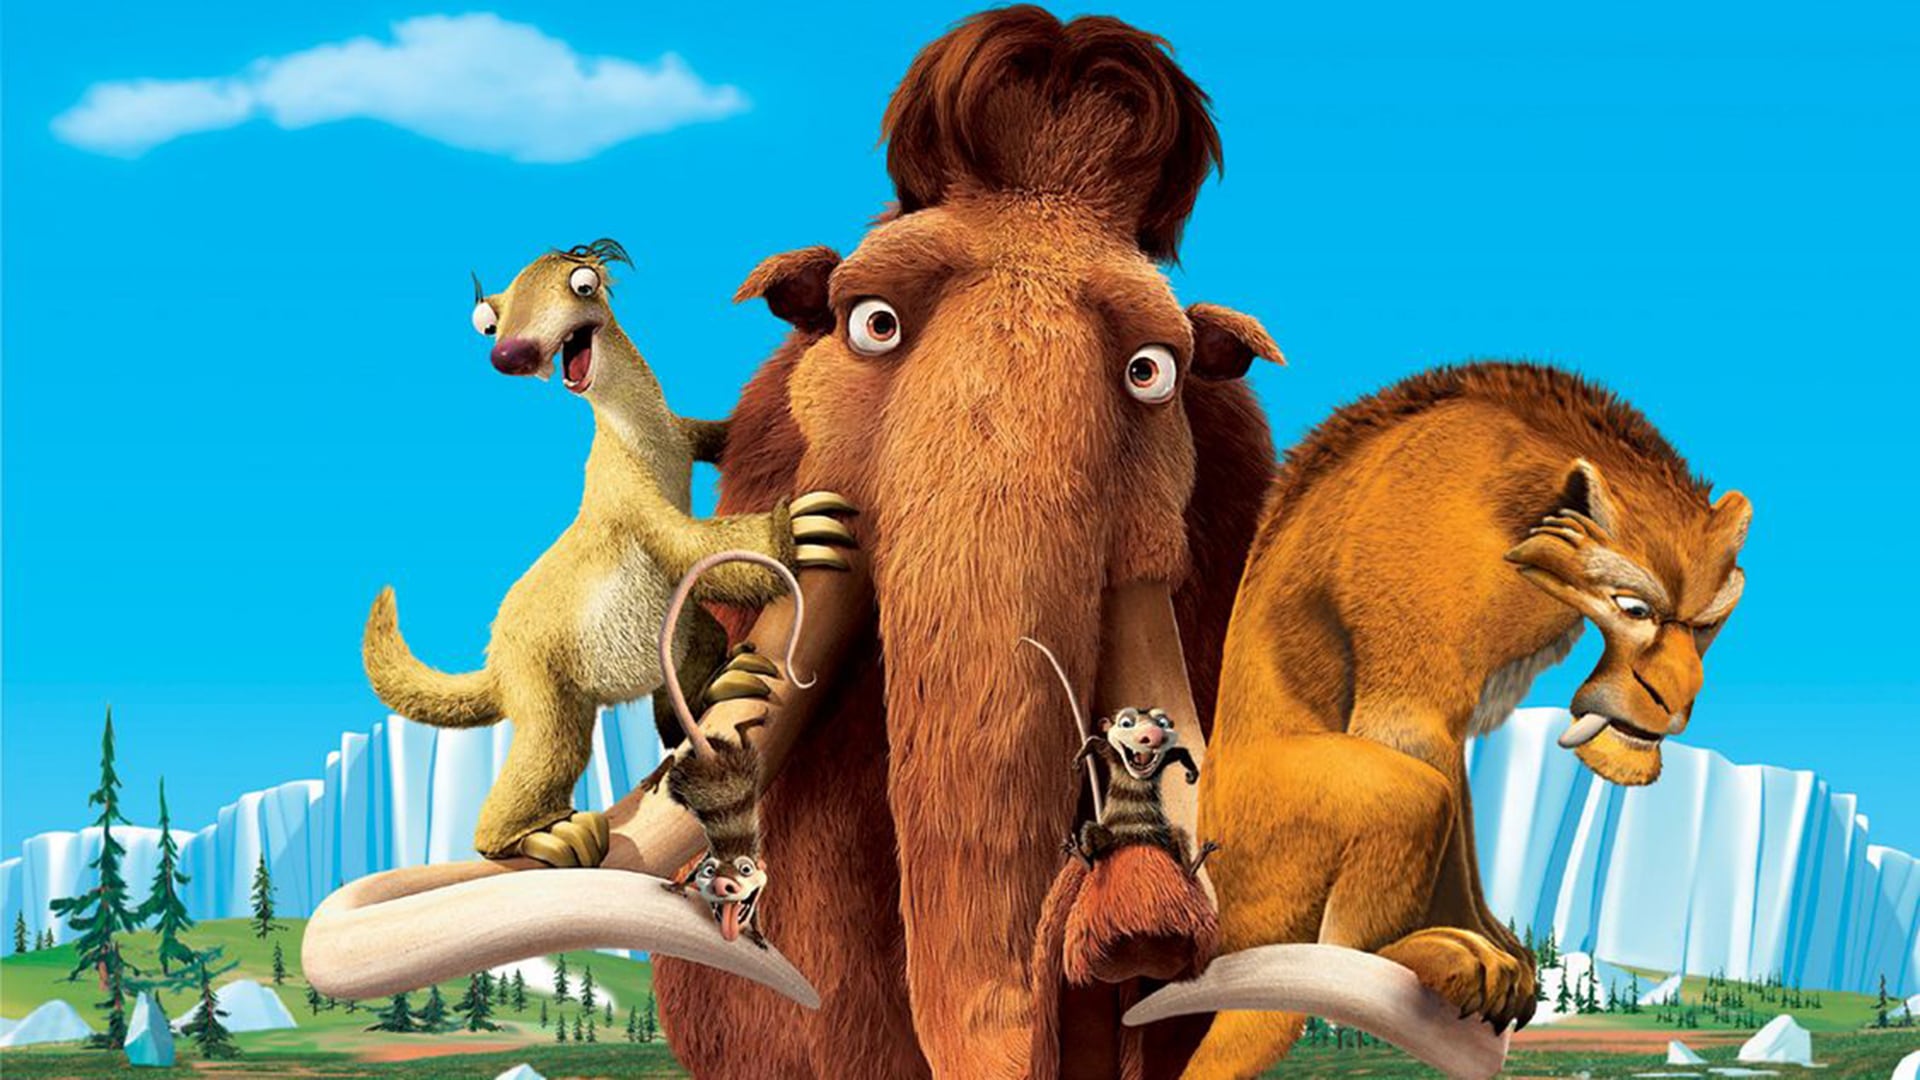 Ice Age: The Meltdown Soundtrack Music - Complete Song List | Tunefind